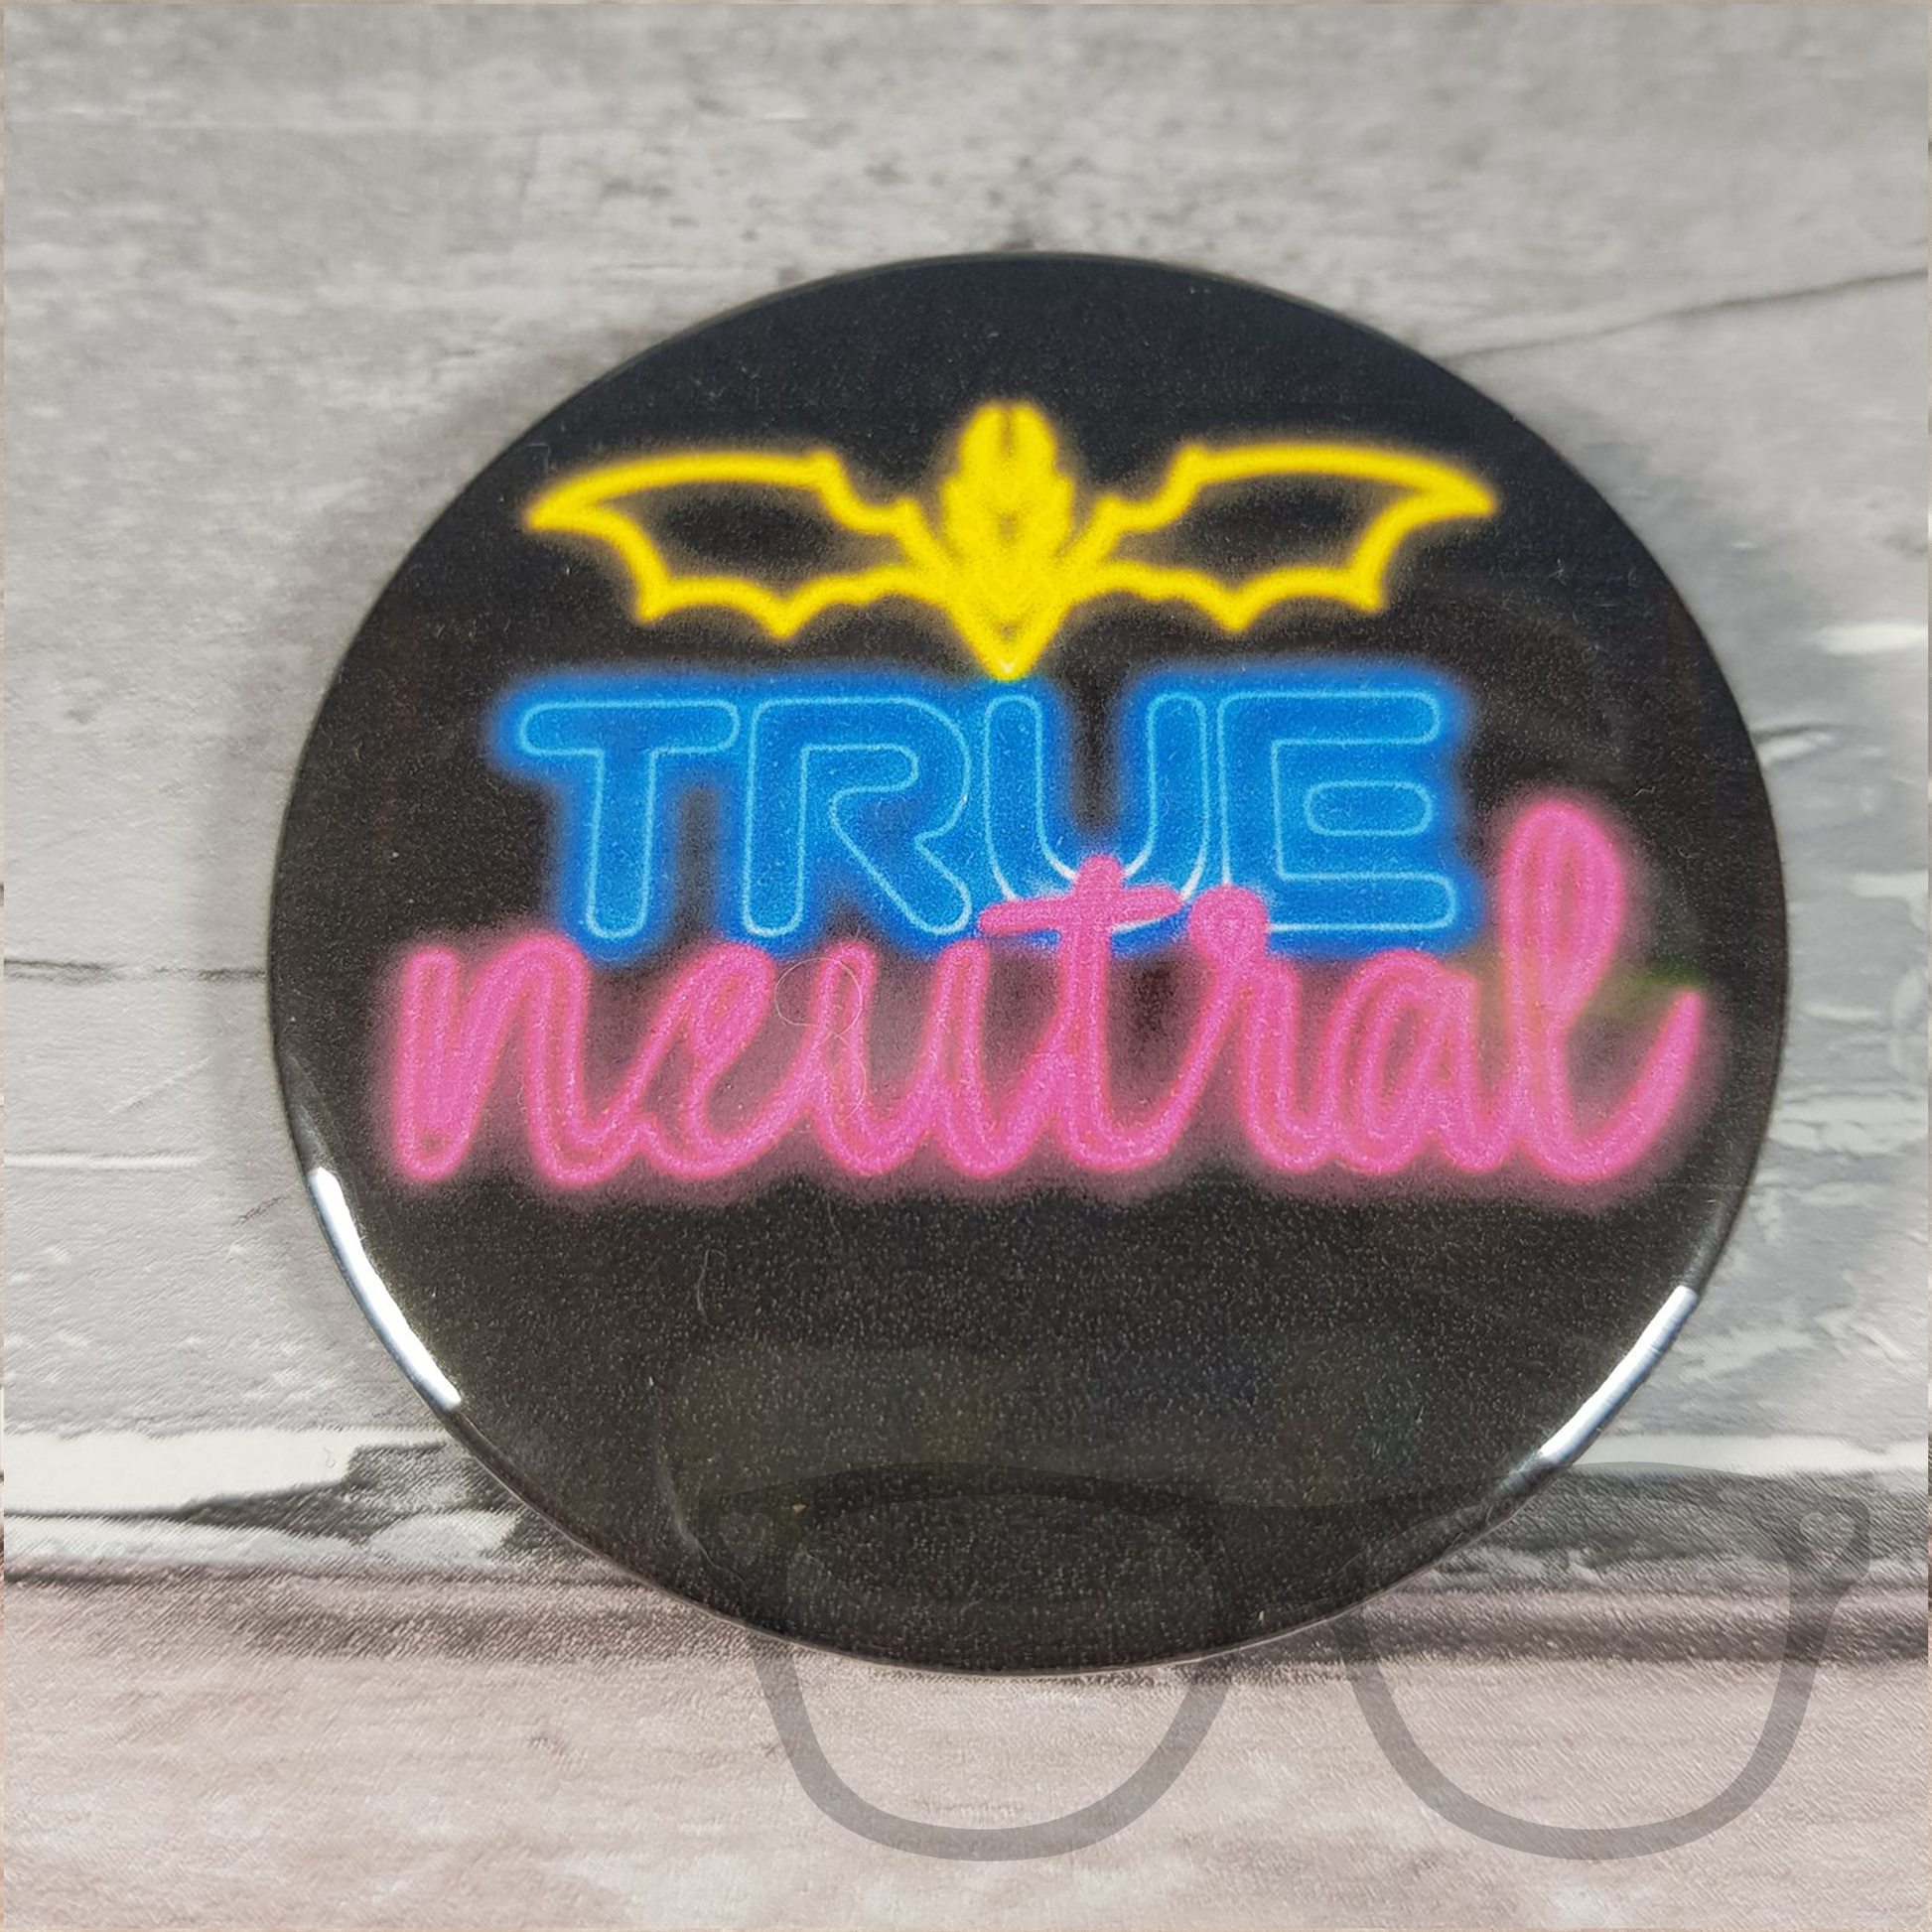 True Neutral button badge in a cyberpunk style ideal for fans of RPG Tabeltop gaming. Features neon light style design of a yellow dragon's head with the text True Neutral underneath